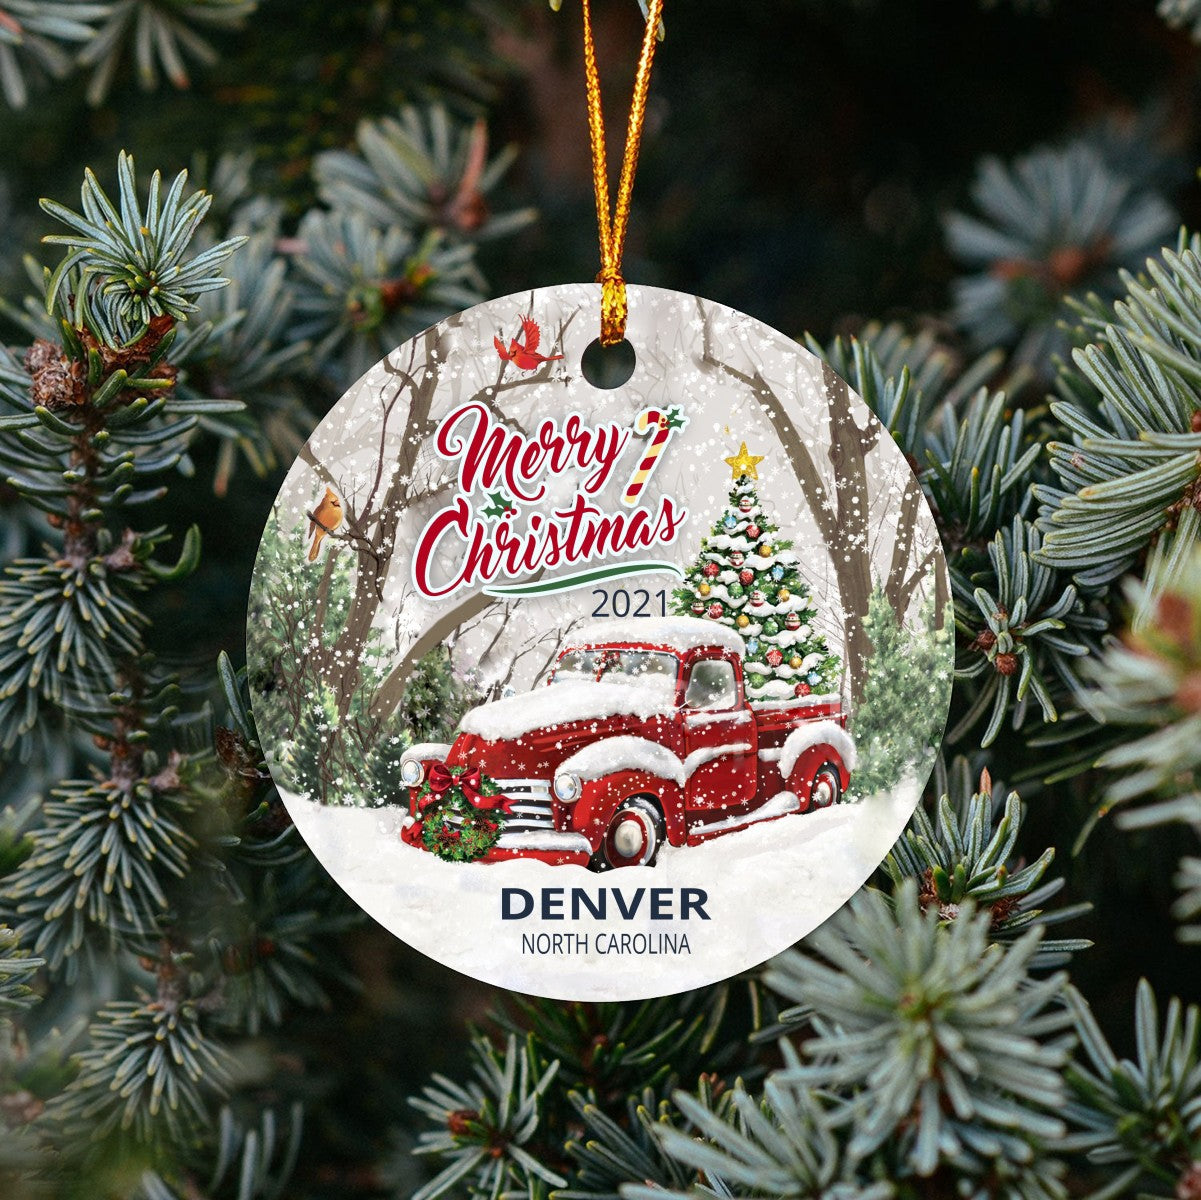 Christmas Tree Ornaments Denver - Ornament With Name City, State Denver North Carolina NC Ornament - Red Truck Xmas Ornaments 3'' Plastic Gift For Family, Friend And Housewarming